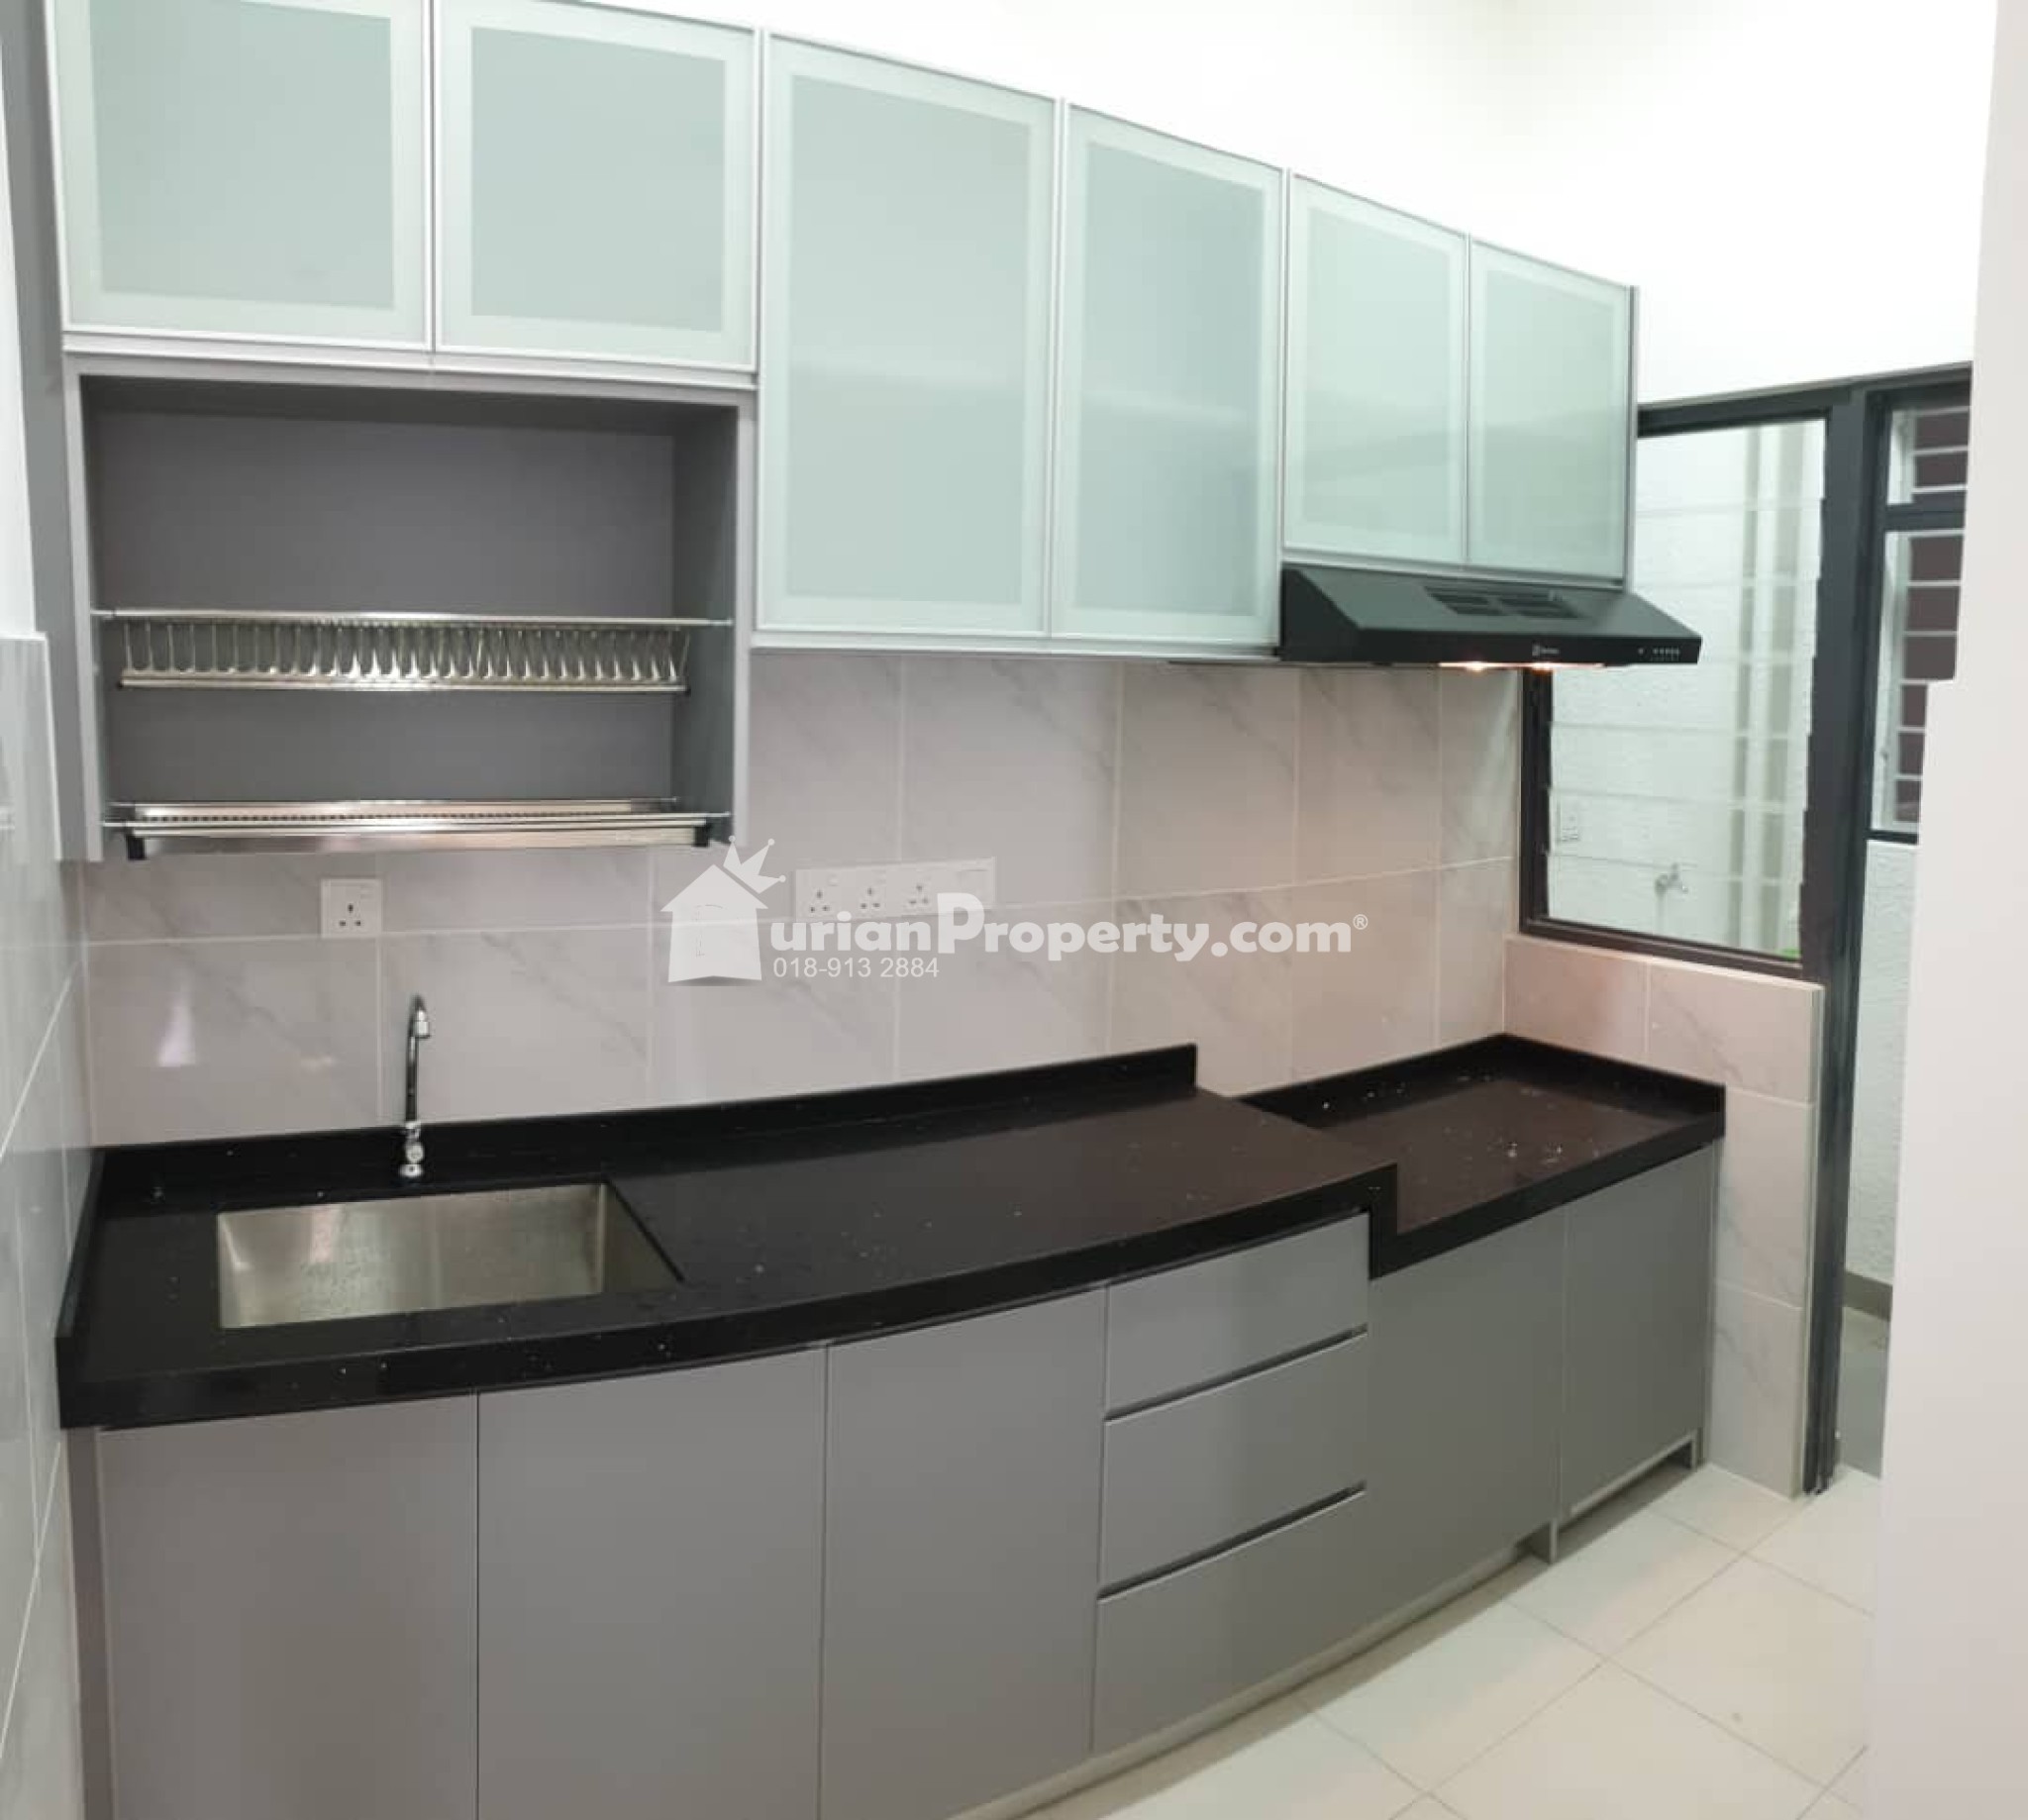 Condo For Rent at Sky Awani Residence 2